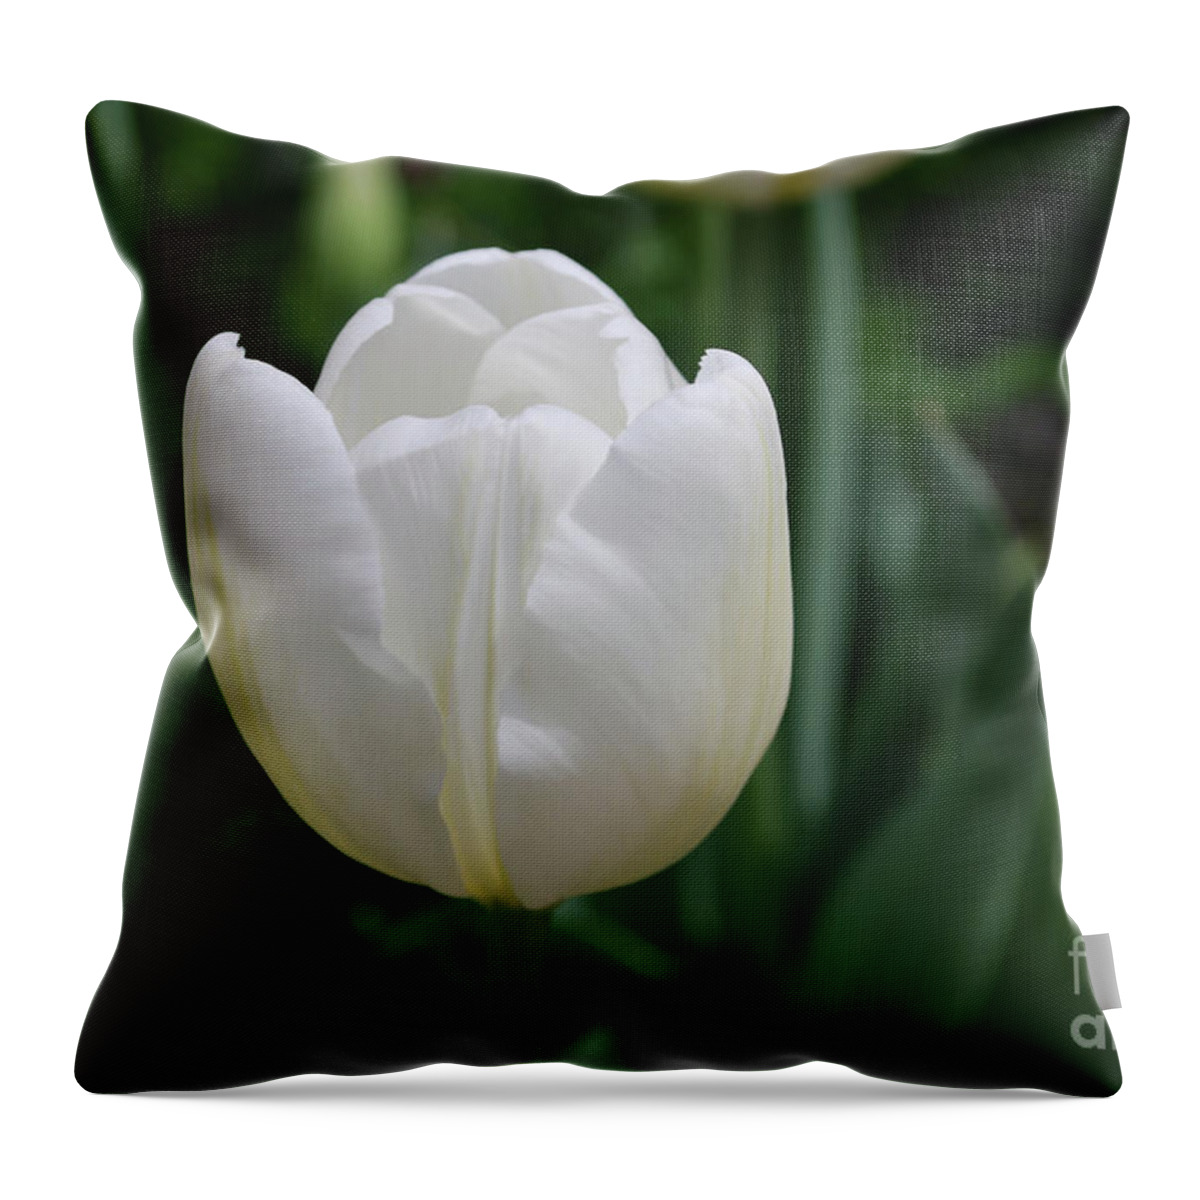 Tulip Throw Pillow featuring the photograph Single Plain White Blooming Tulip Flower Blossom by DejaVu Designs